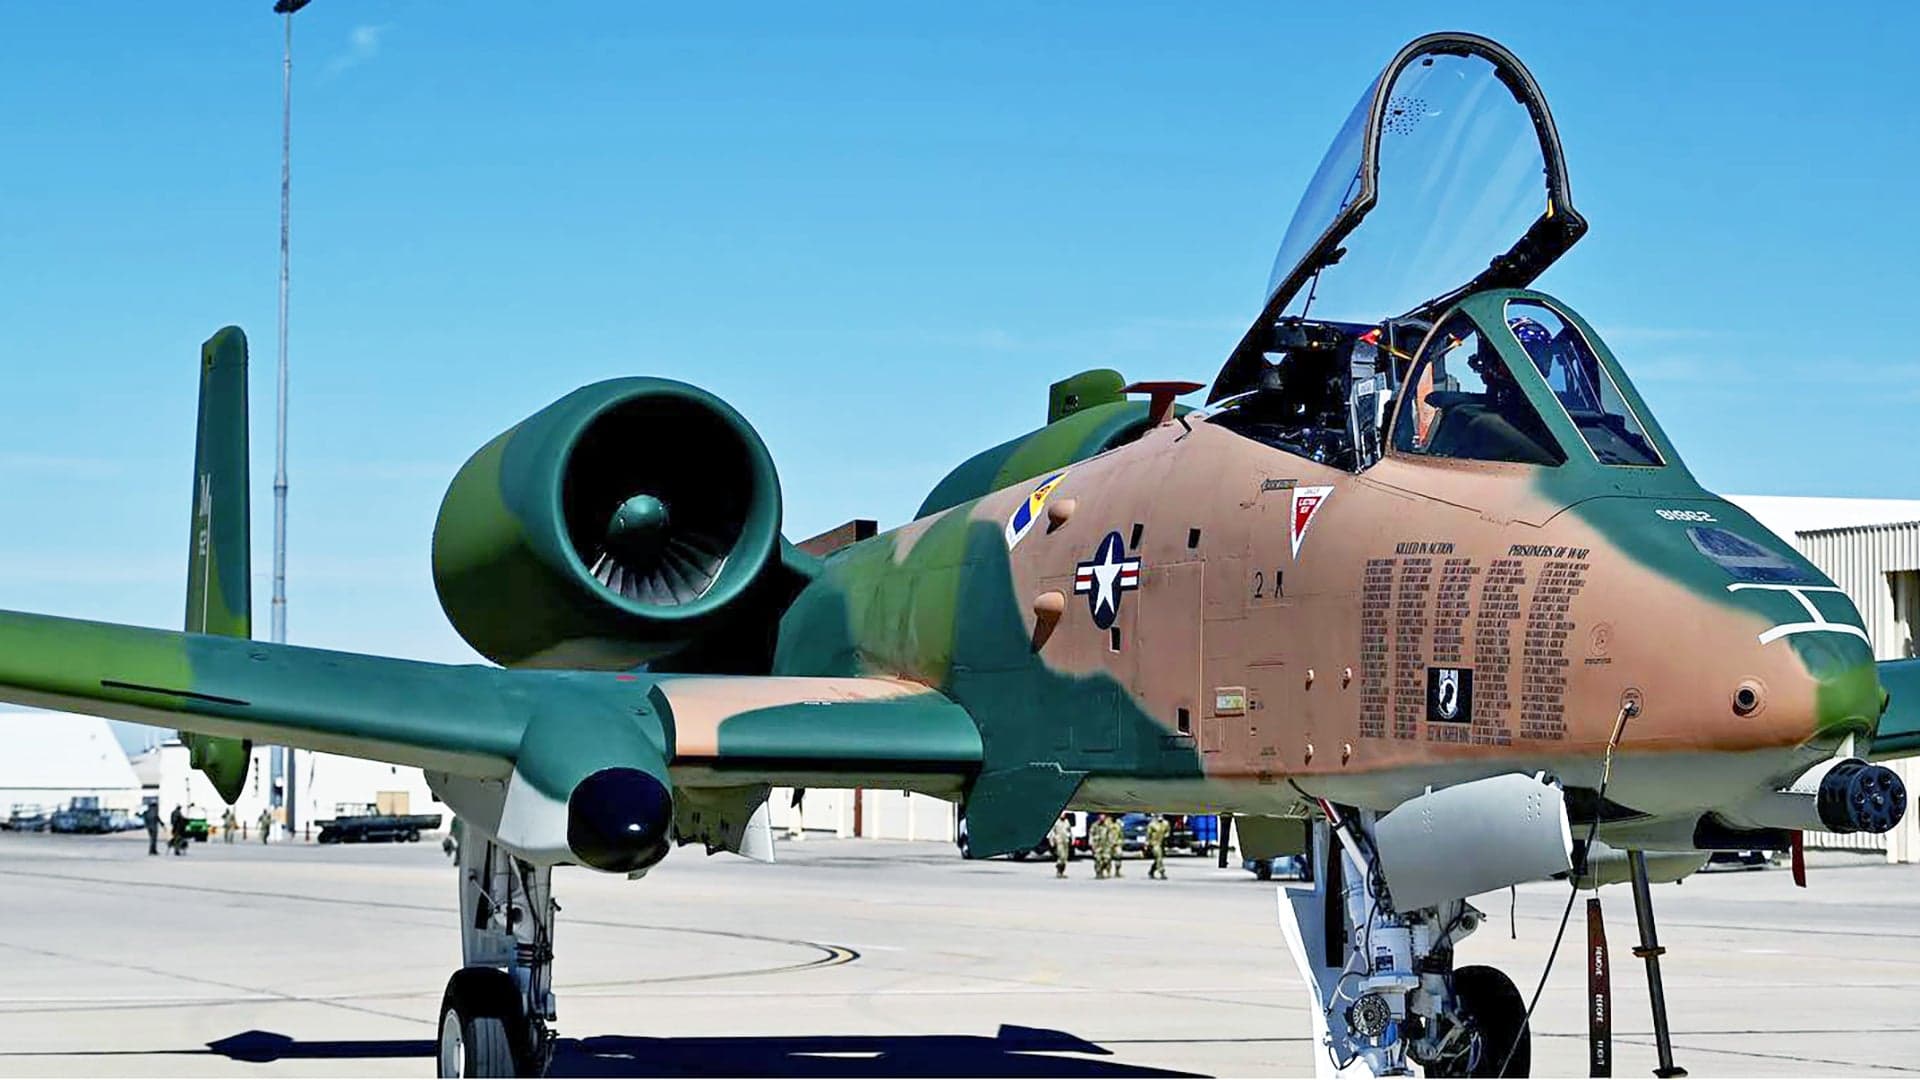 A-10 Warthog Emerges Painted In Green And Tan Camouflage